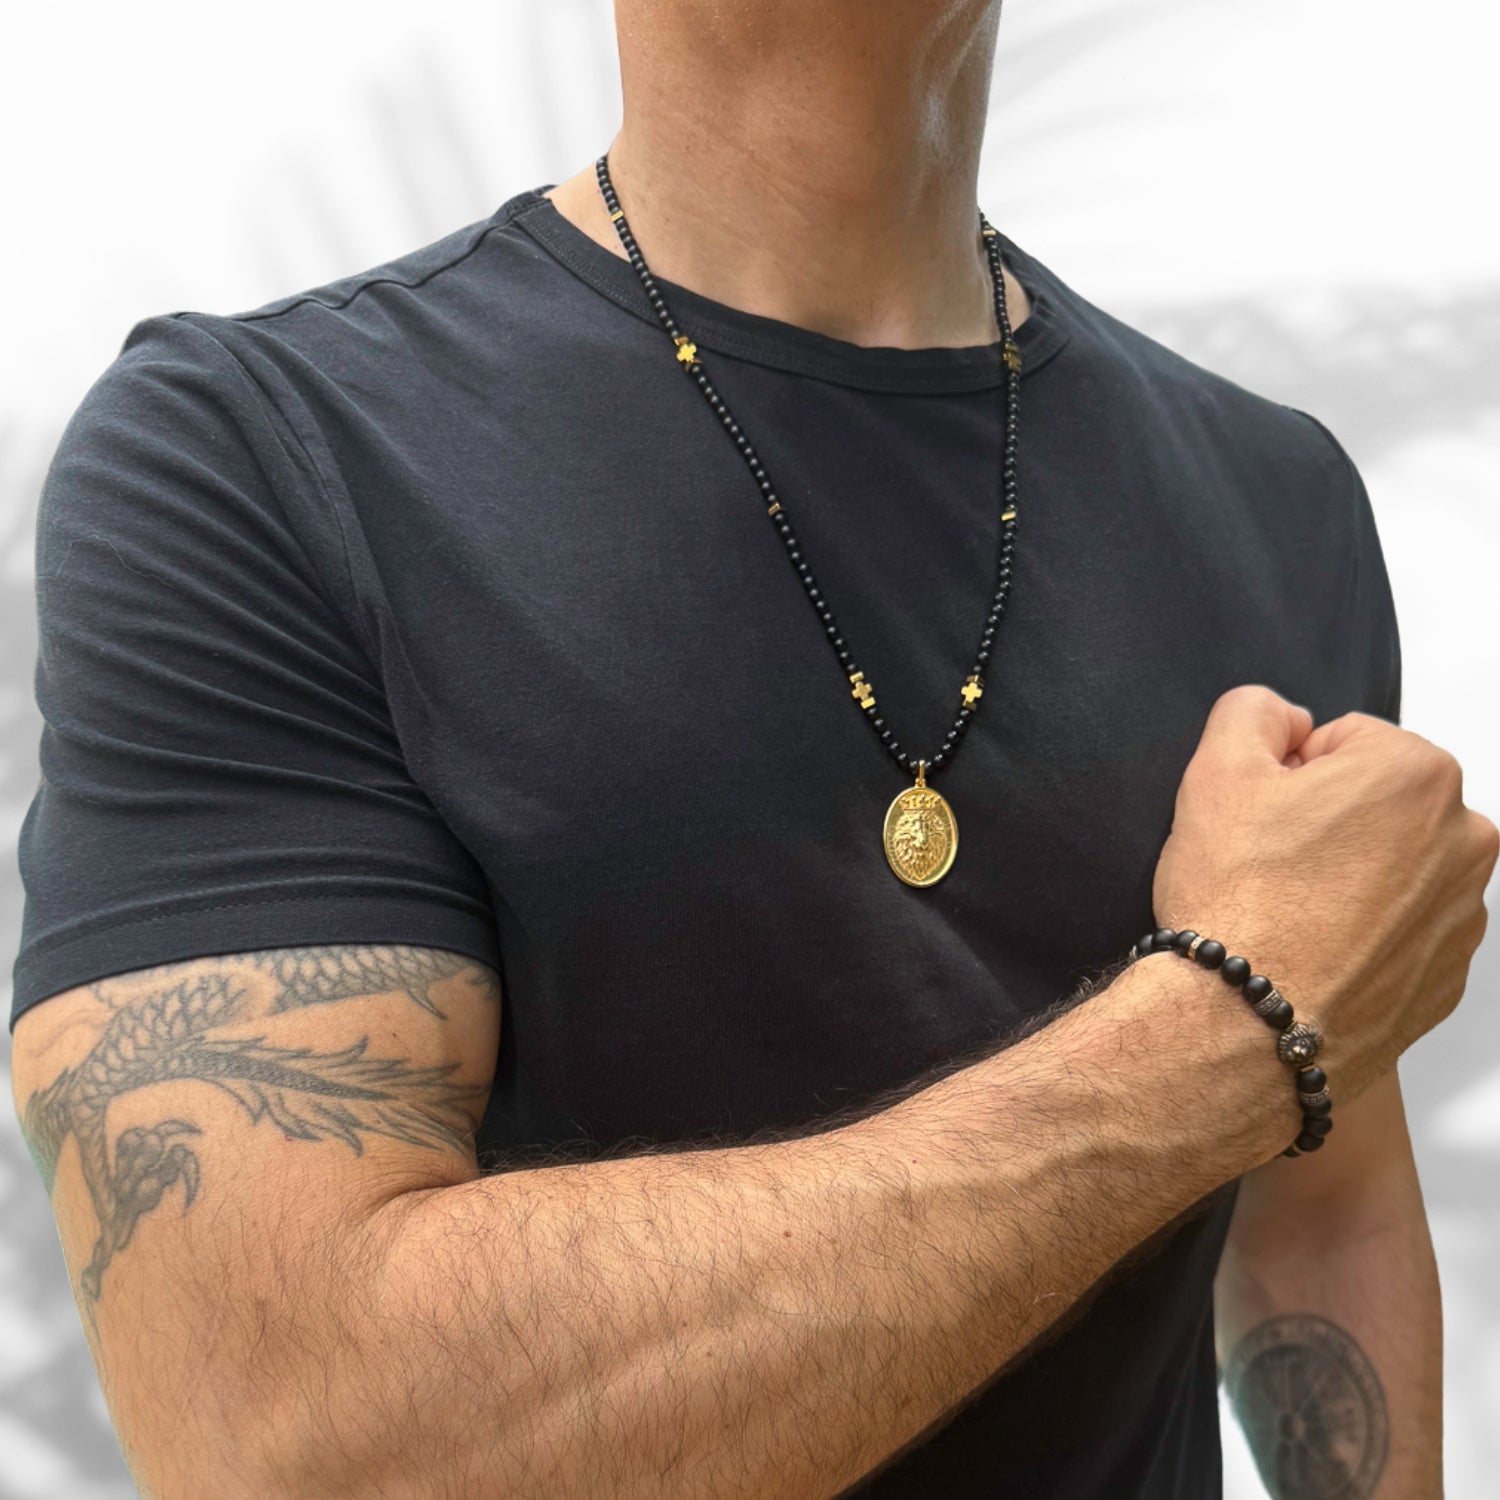 Men's necklace featuring black onyx stones and a gold-plated lion pendant, symbolizing courage and strength